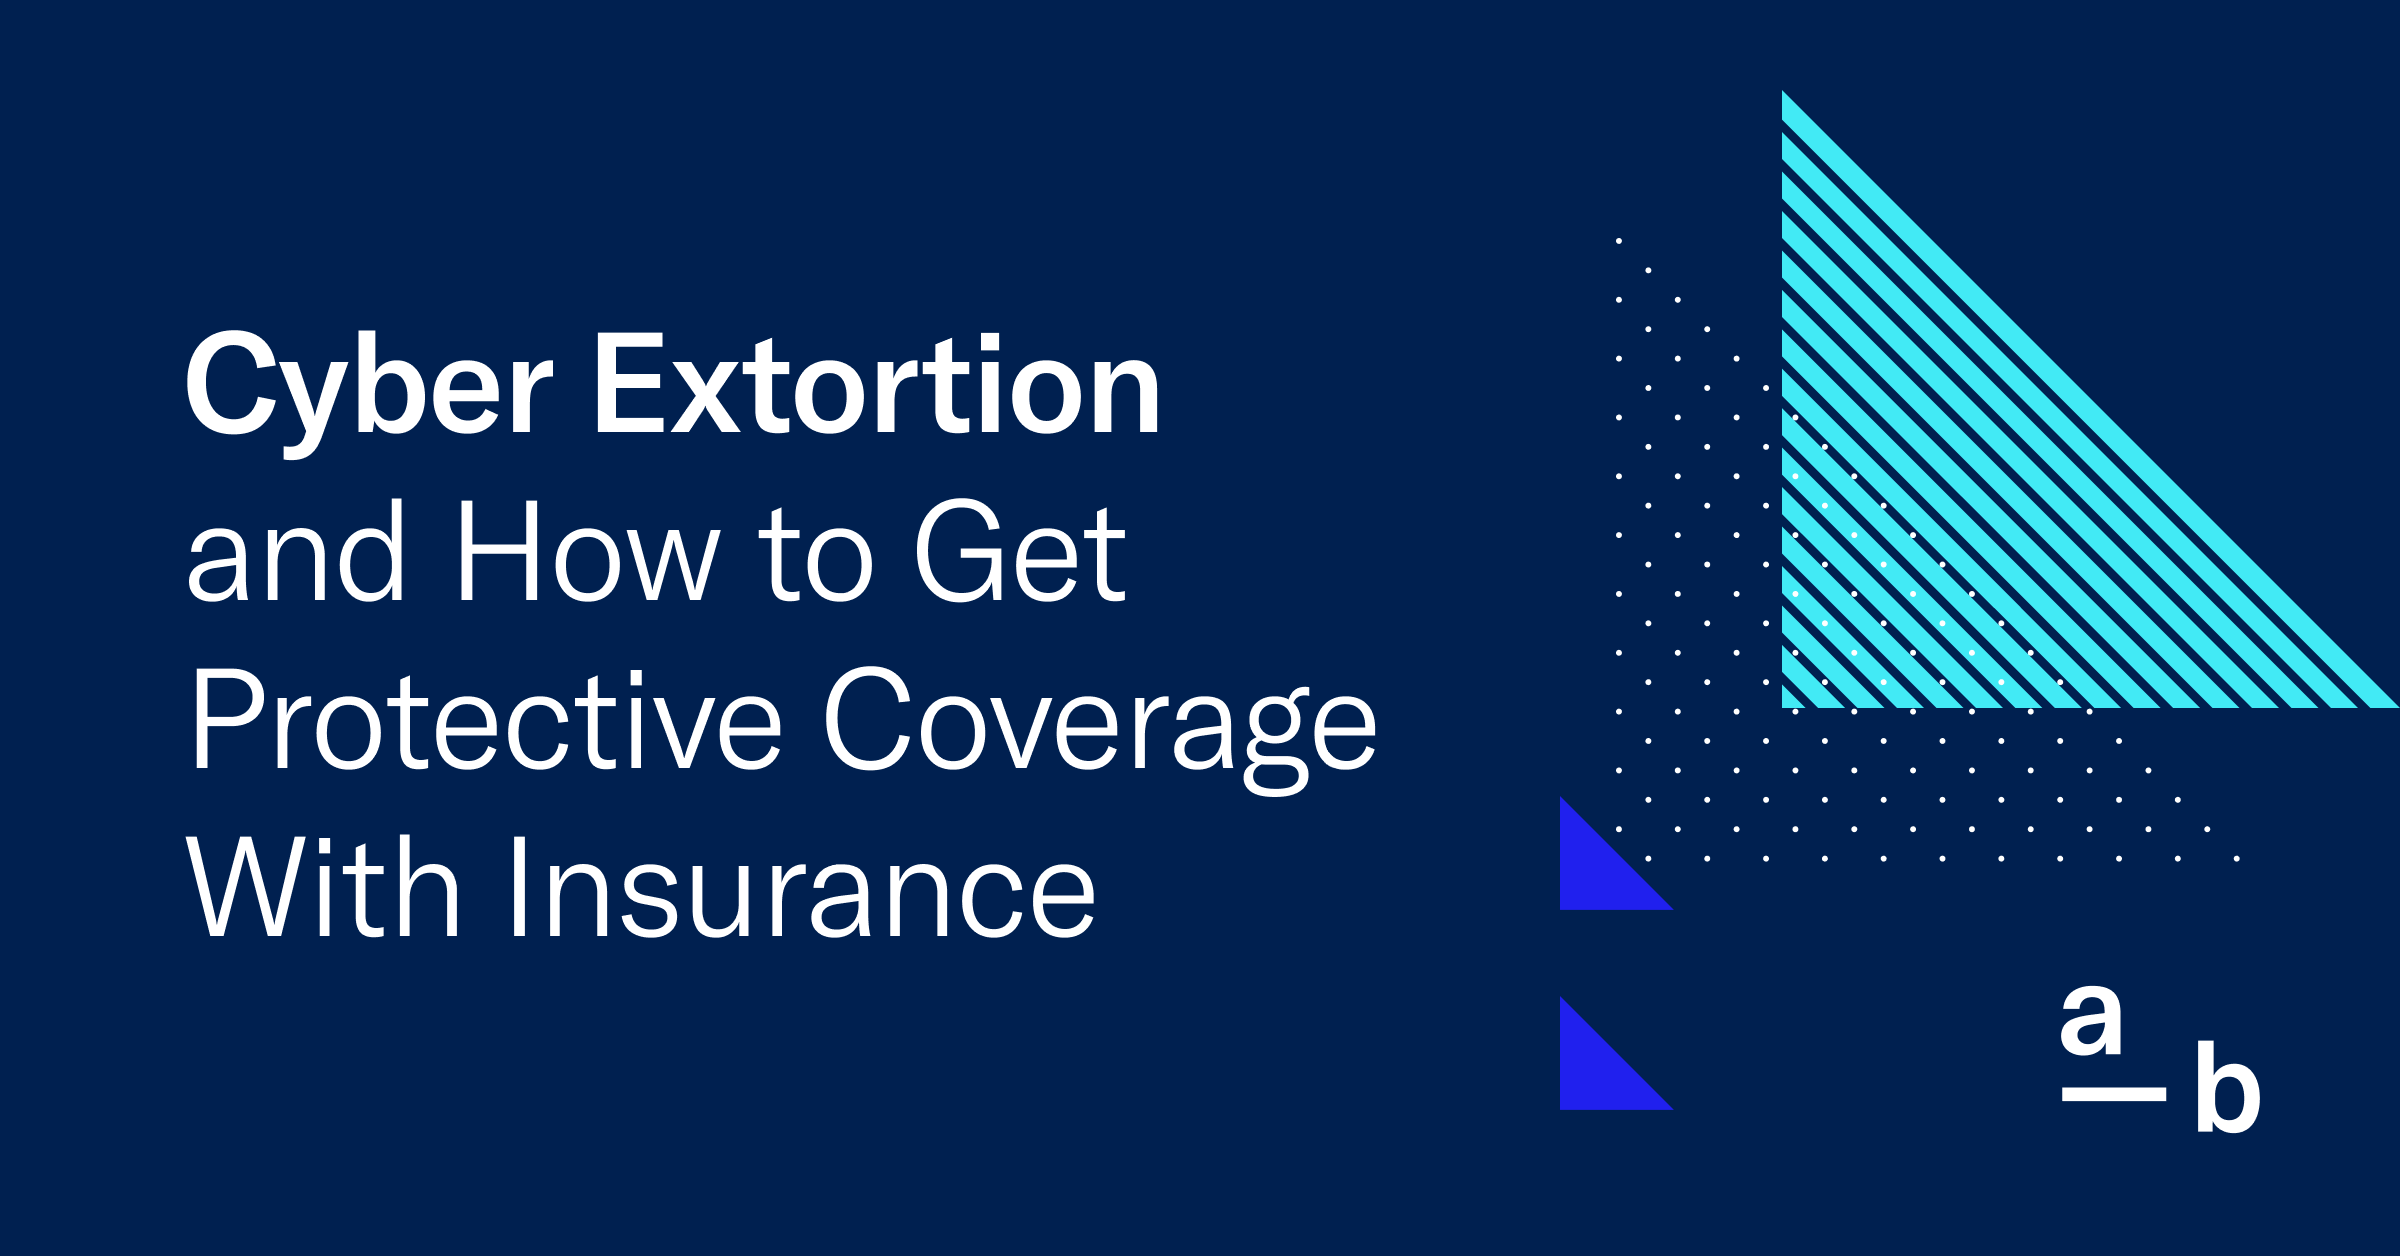 Cyber Extortion and How to Get Protective Coverage With Insurance